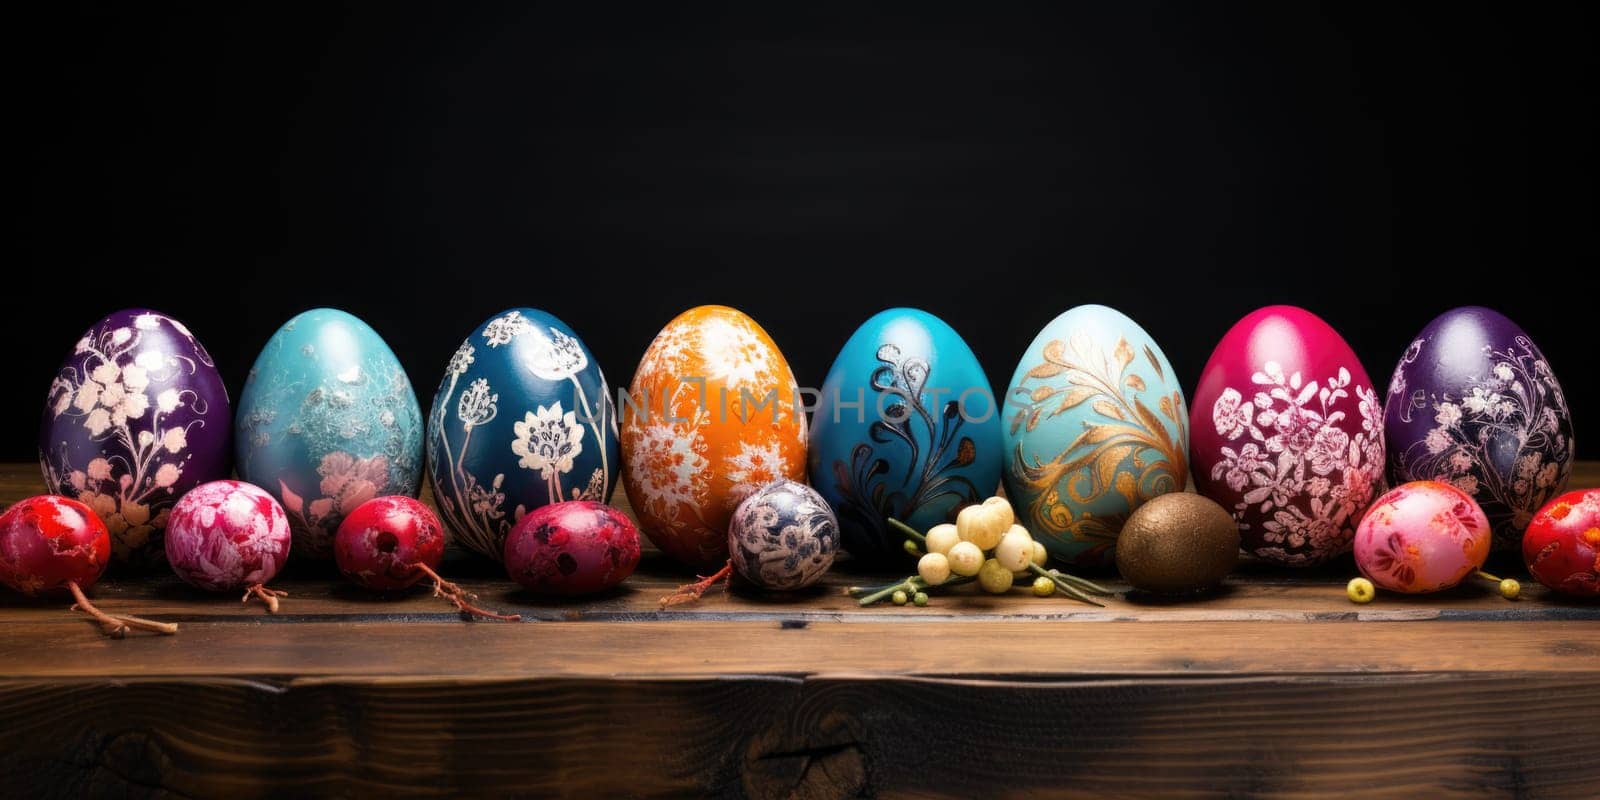 A row of vibrant painted Easter eggs arranged neatly on top of a rustic wooden table.